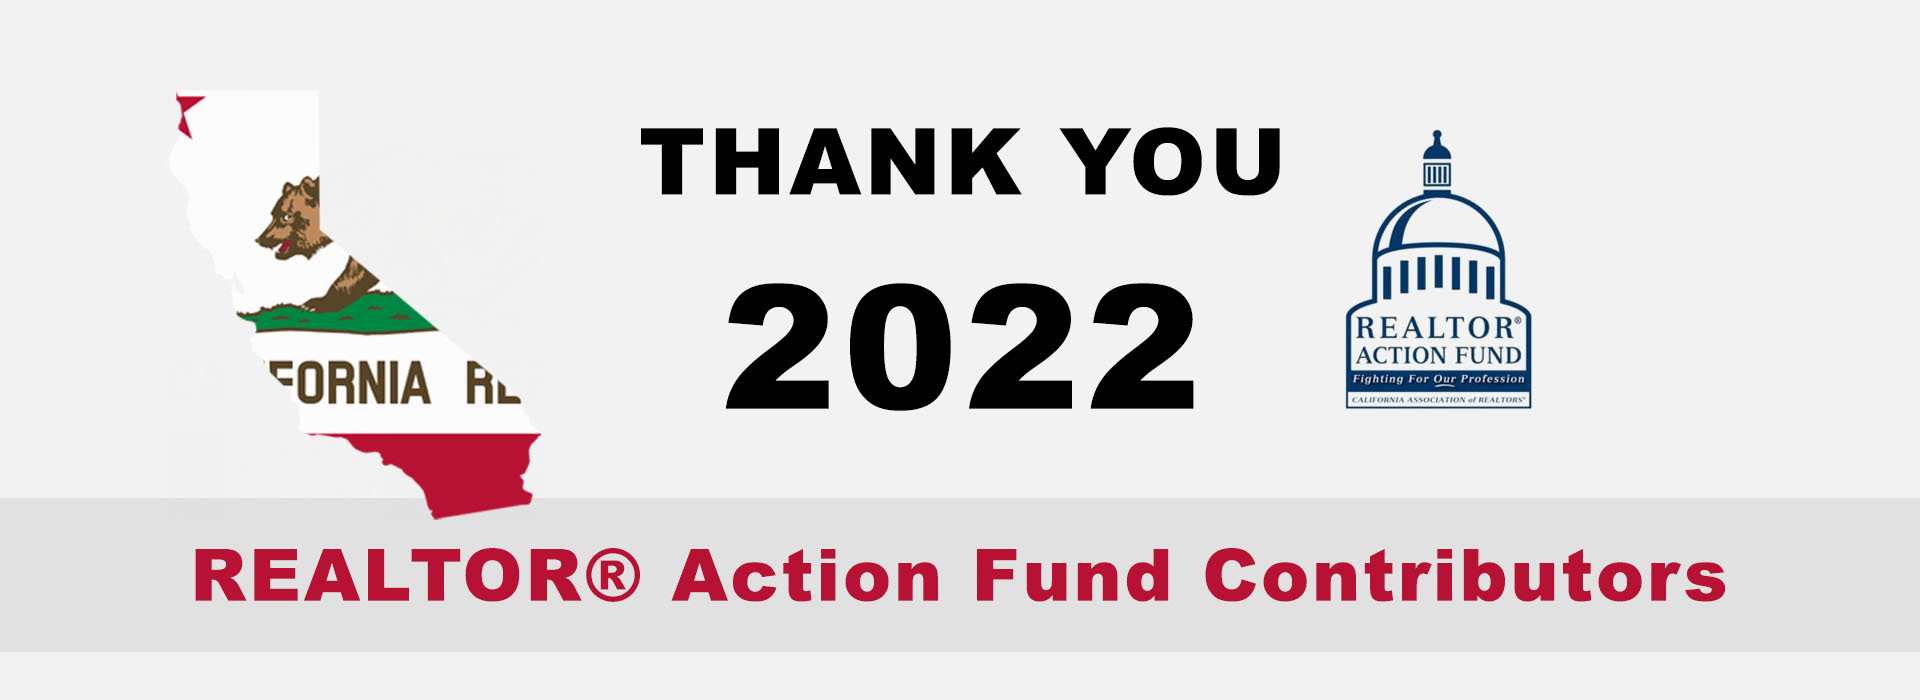 Thank_You_RAF_Contributers_2022